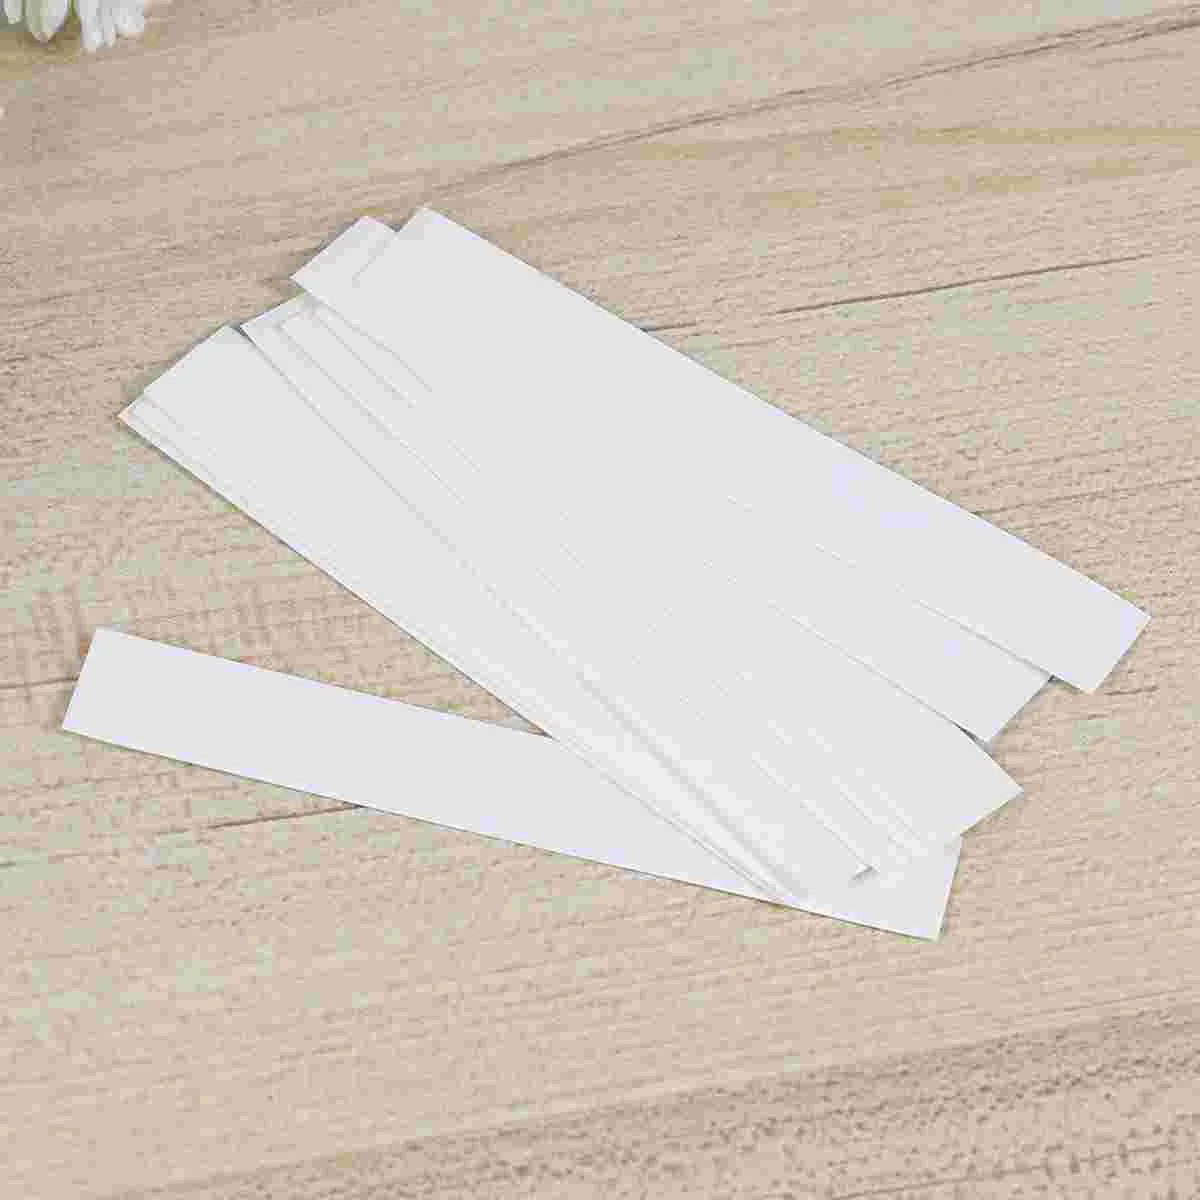 

Tape Double Sided Fabric Clothing Clothes Body Skin Women Clear Strap Sticker Sticking Anti Waterproof Adhesive Safe Fashion S